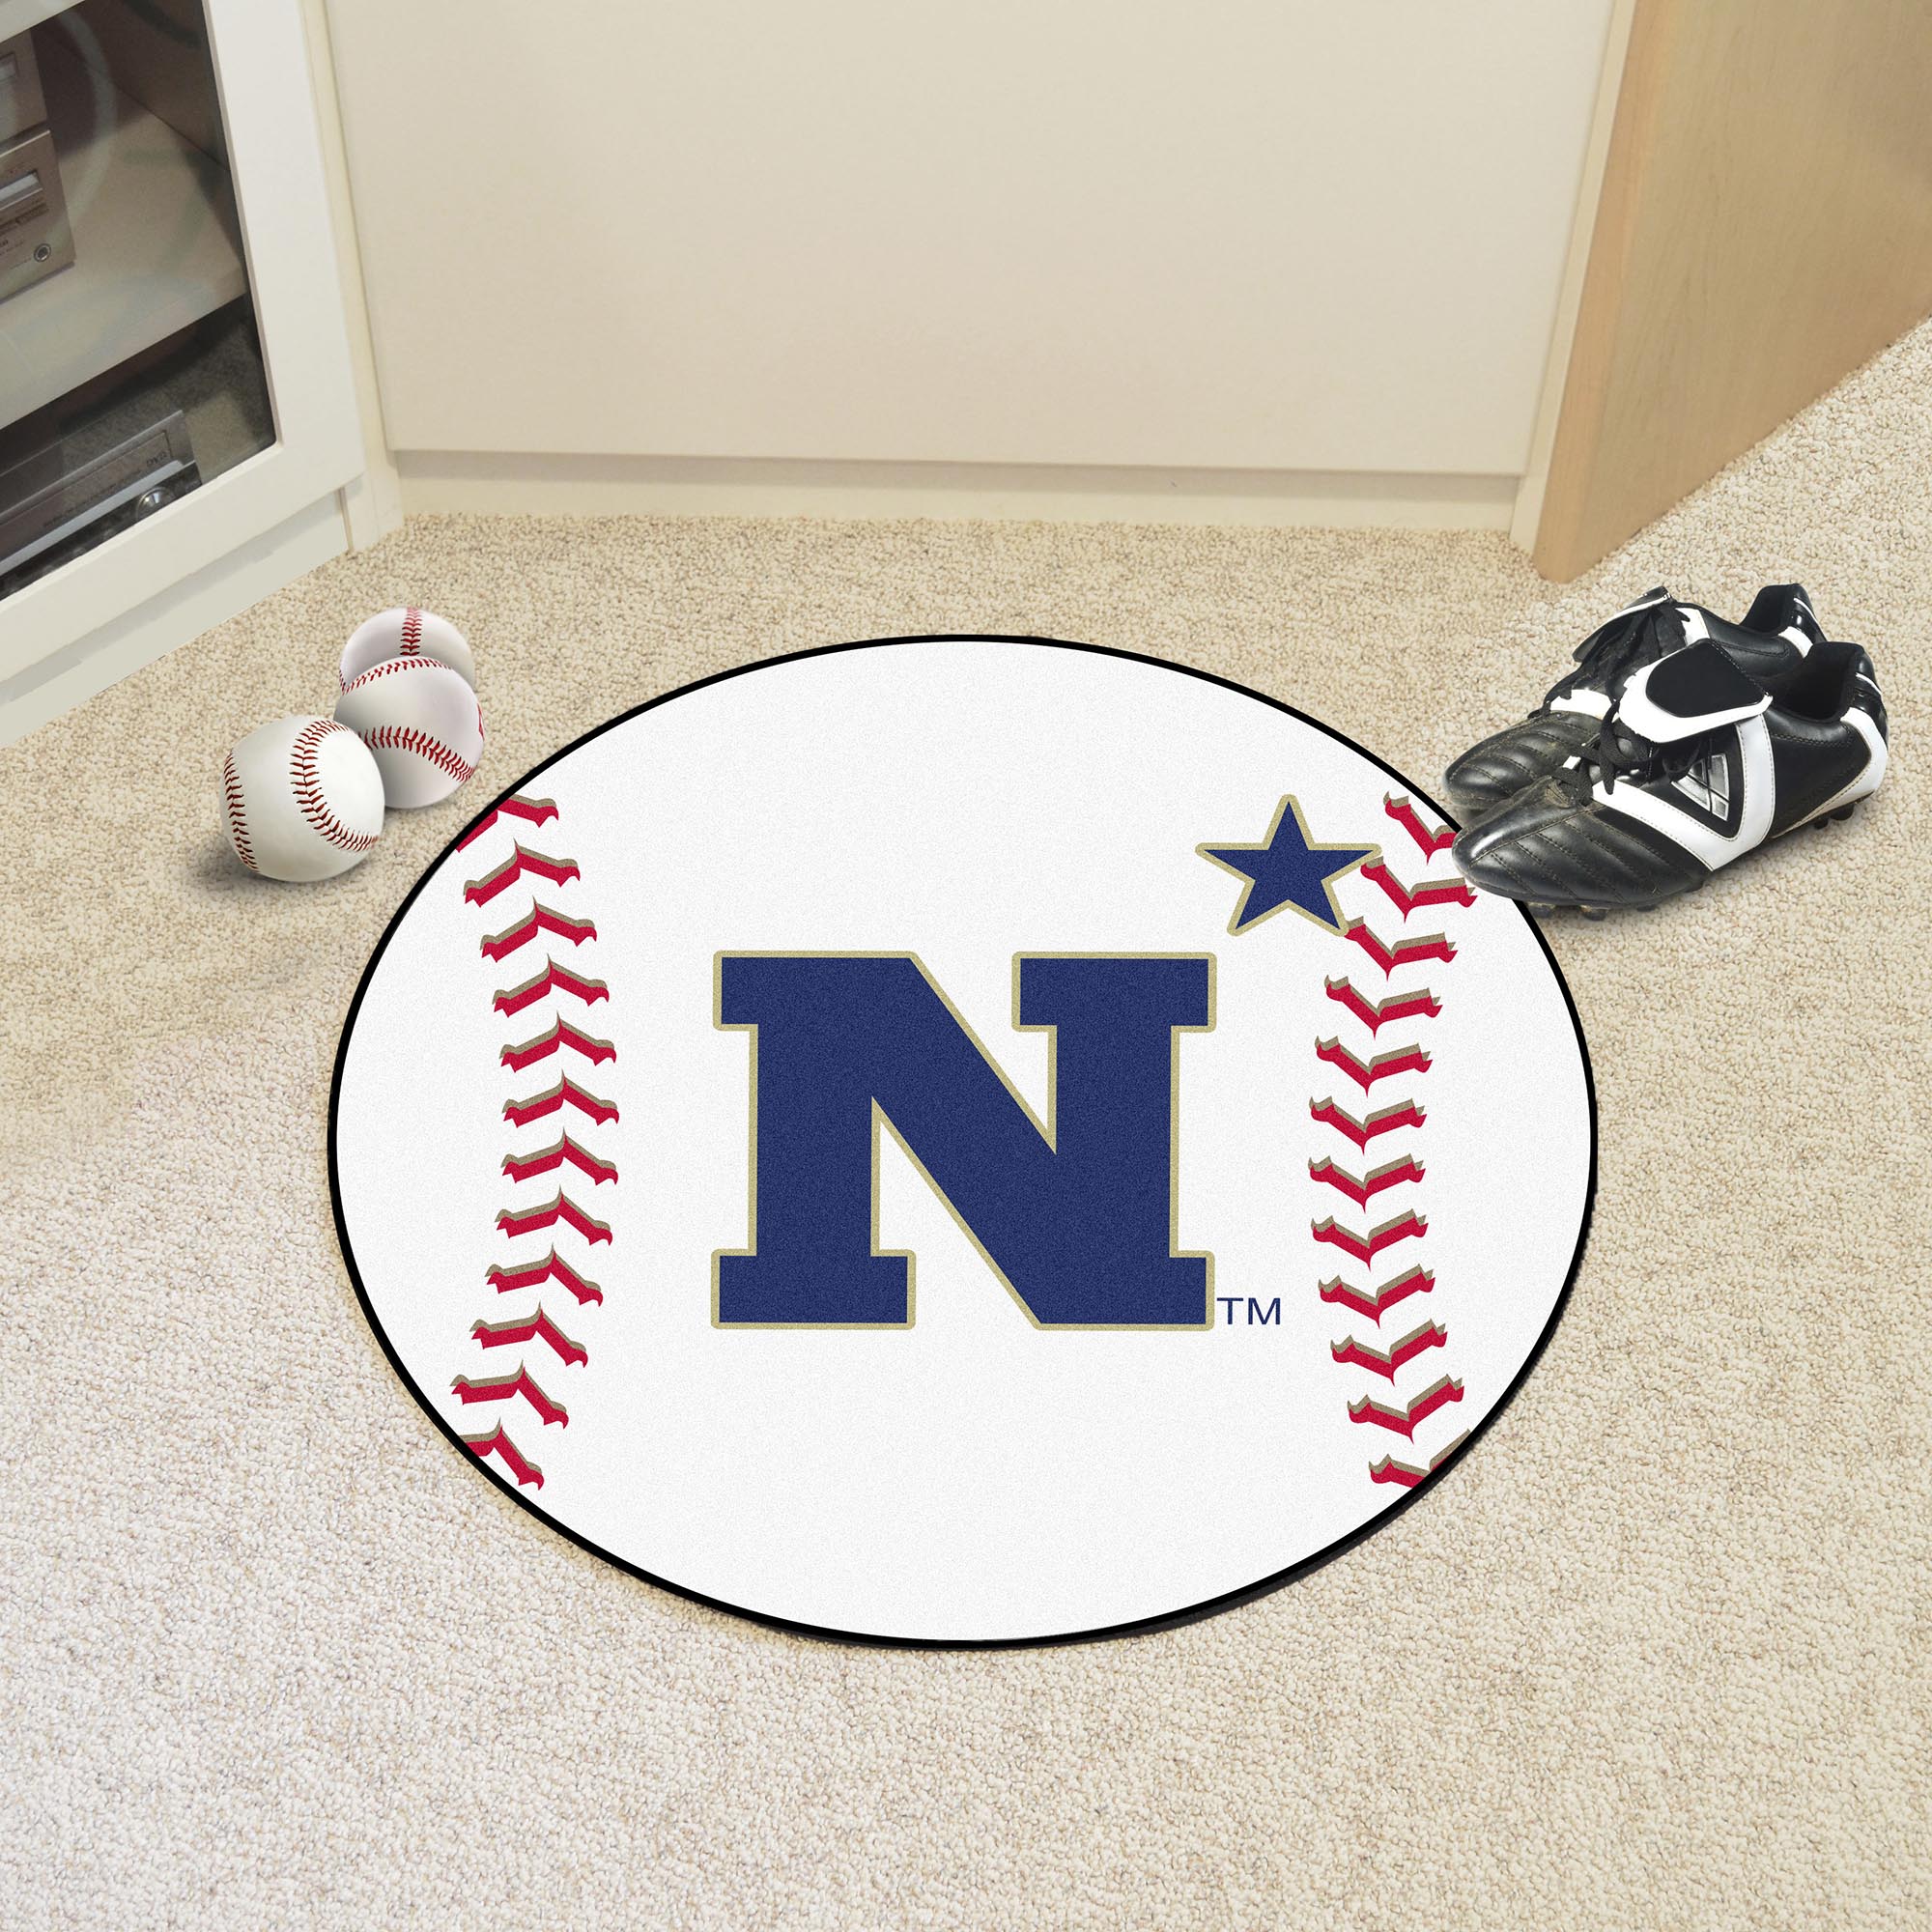 United States Naval Academy Ball Shaped Area rugs (Ball Shaped Area Rugs: Baseball)